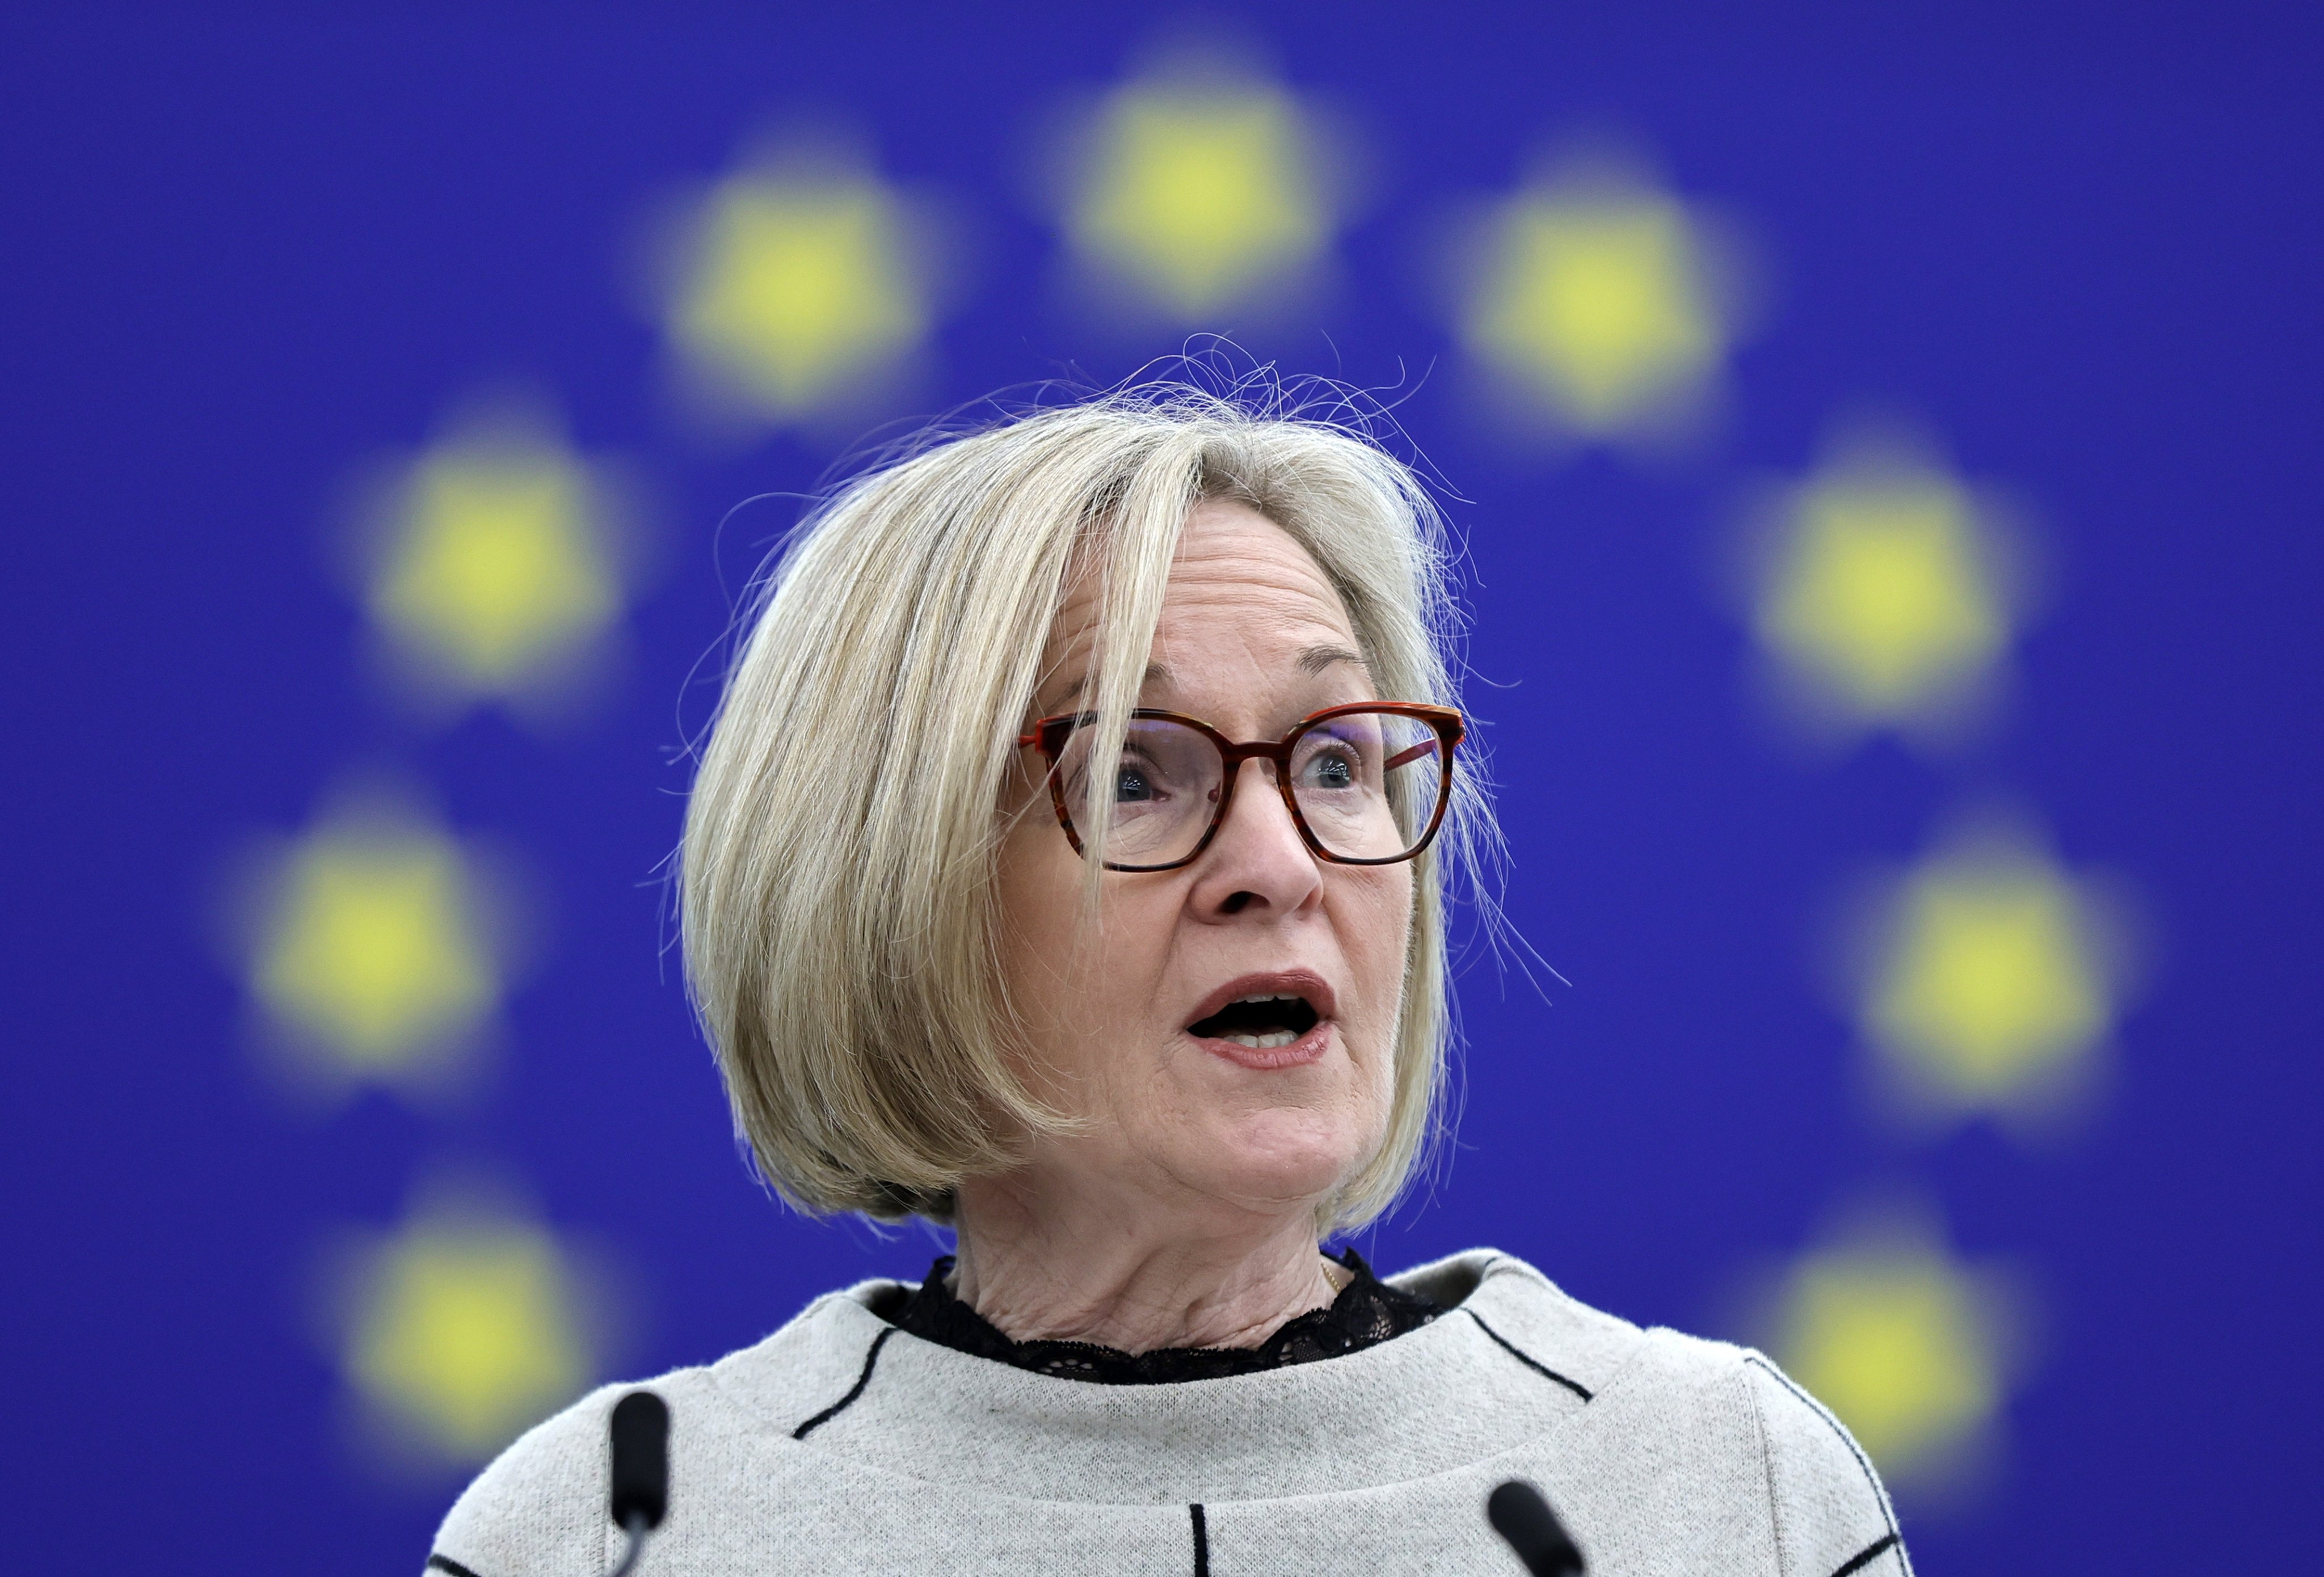 Mairead McGuinness, the European commissioner for financial services, speaks at the European Parliament in Strasbourg, France, on Monday. Photo: EPA-EFE